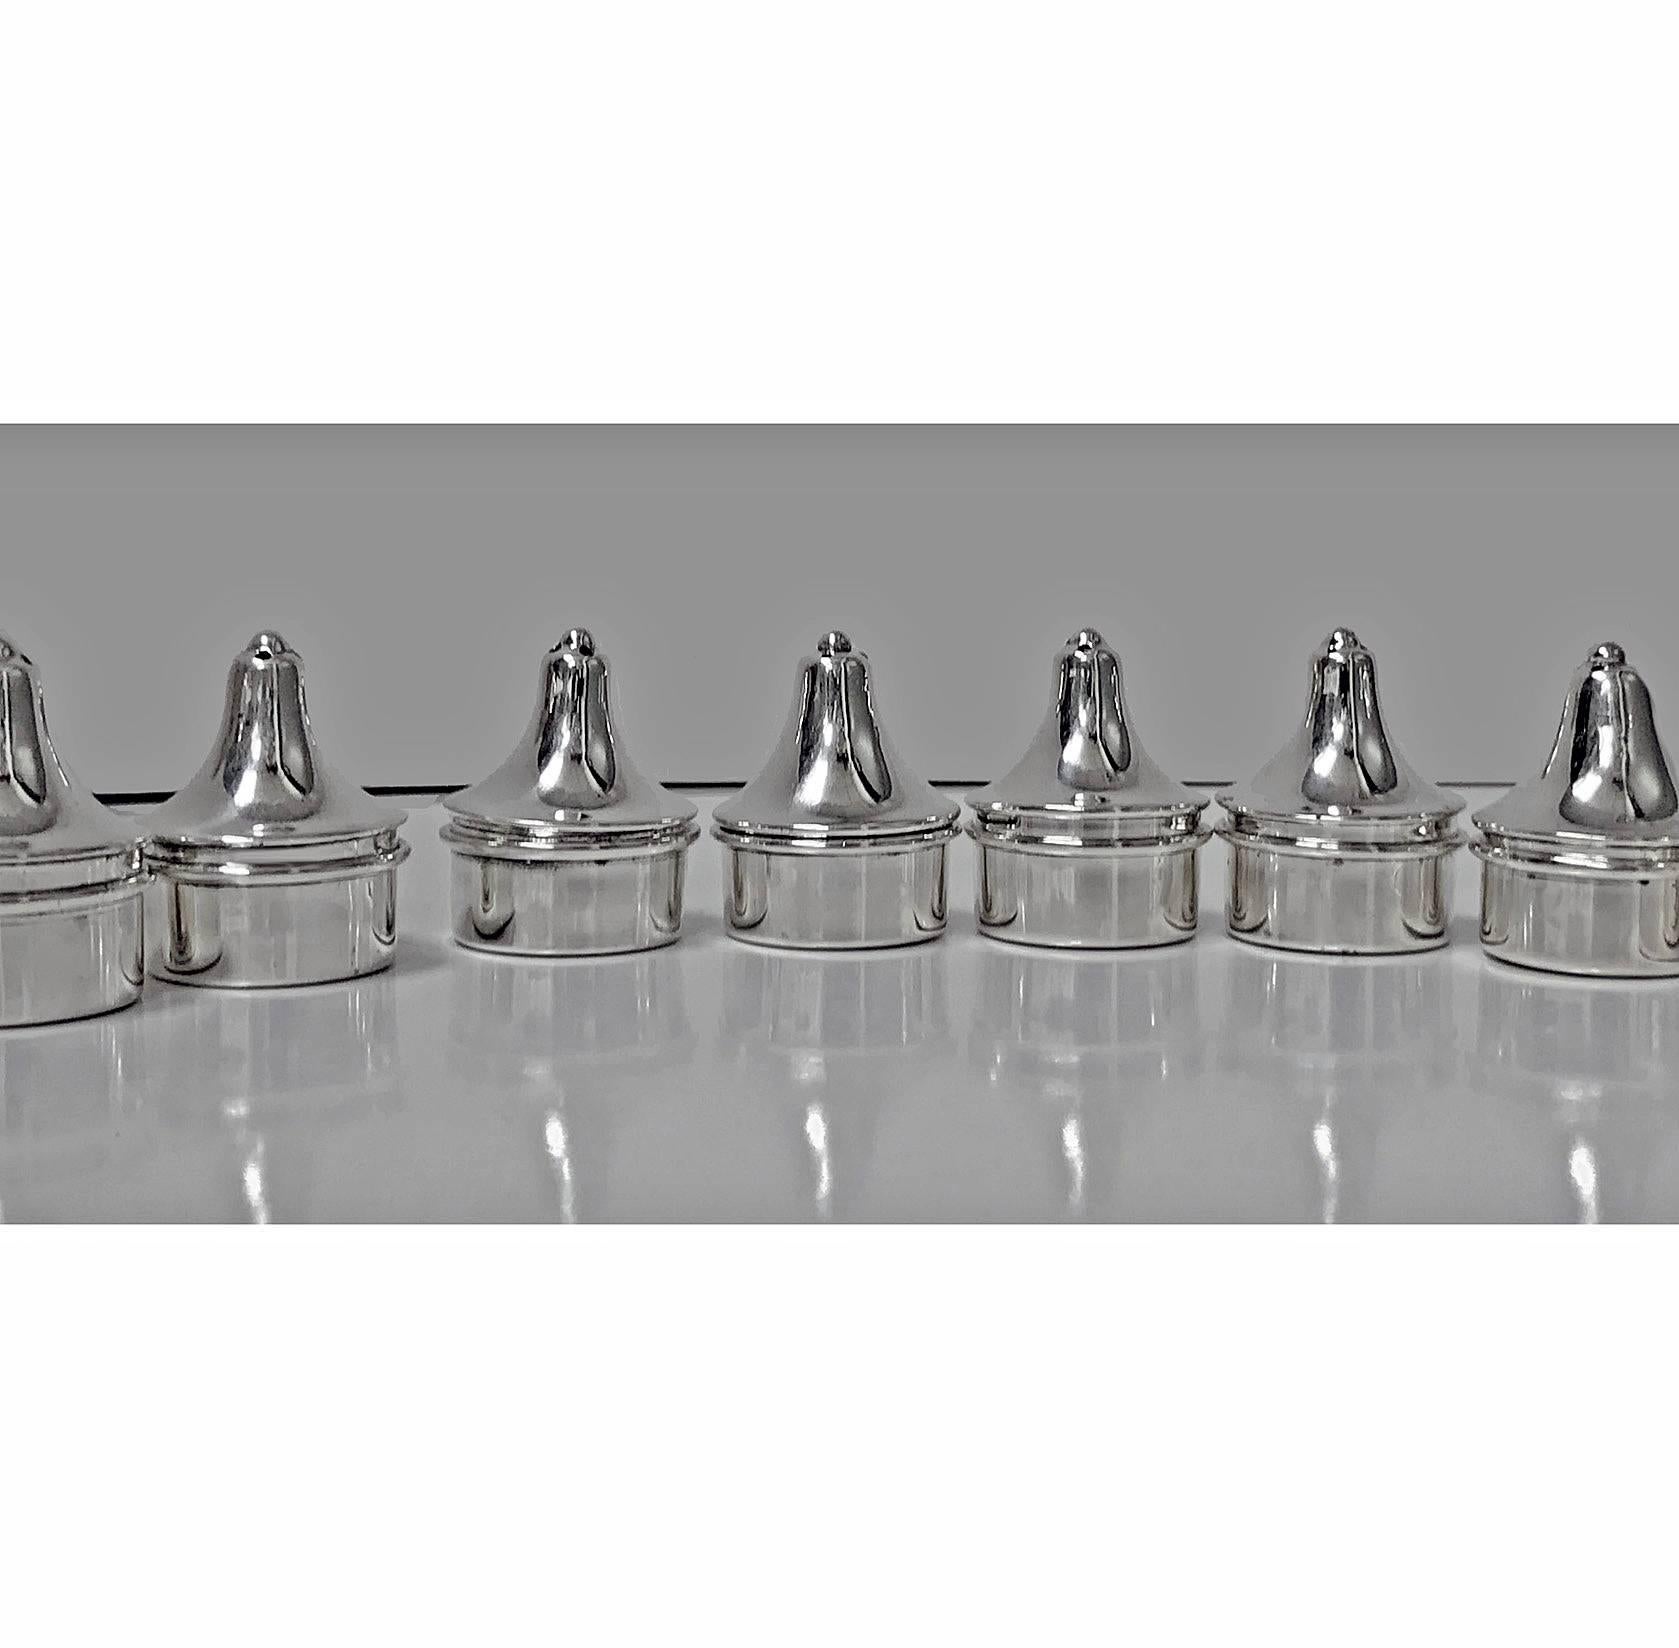 Four pairs of Carl Poul Petersen sterling silver salt and pepper casters, circa 1950. Each of a modernism tower like design. Pierced holes are larger for salt. All stamped with Petersen marks. Measures: Height 1.5 inches. Total item weight: 138.25